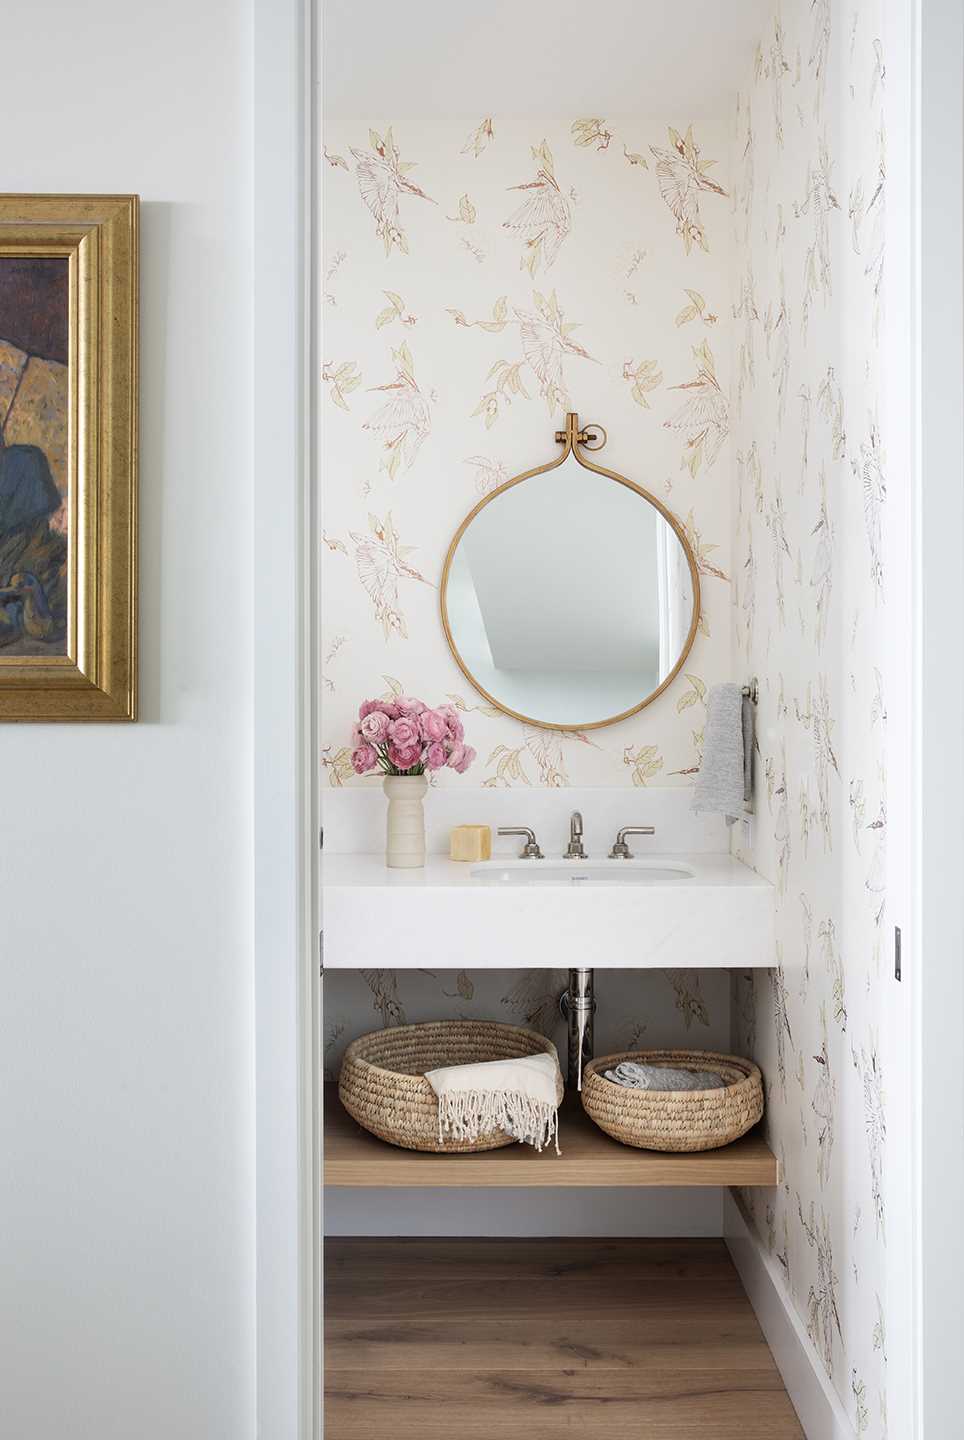 A modern powder room with a delicate wallpaper and round mirror.